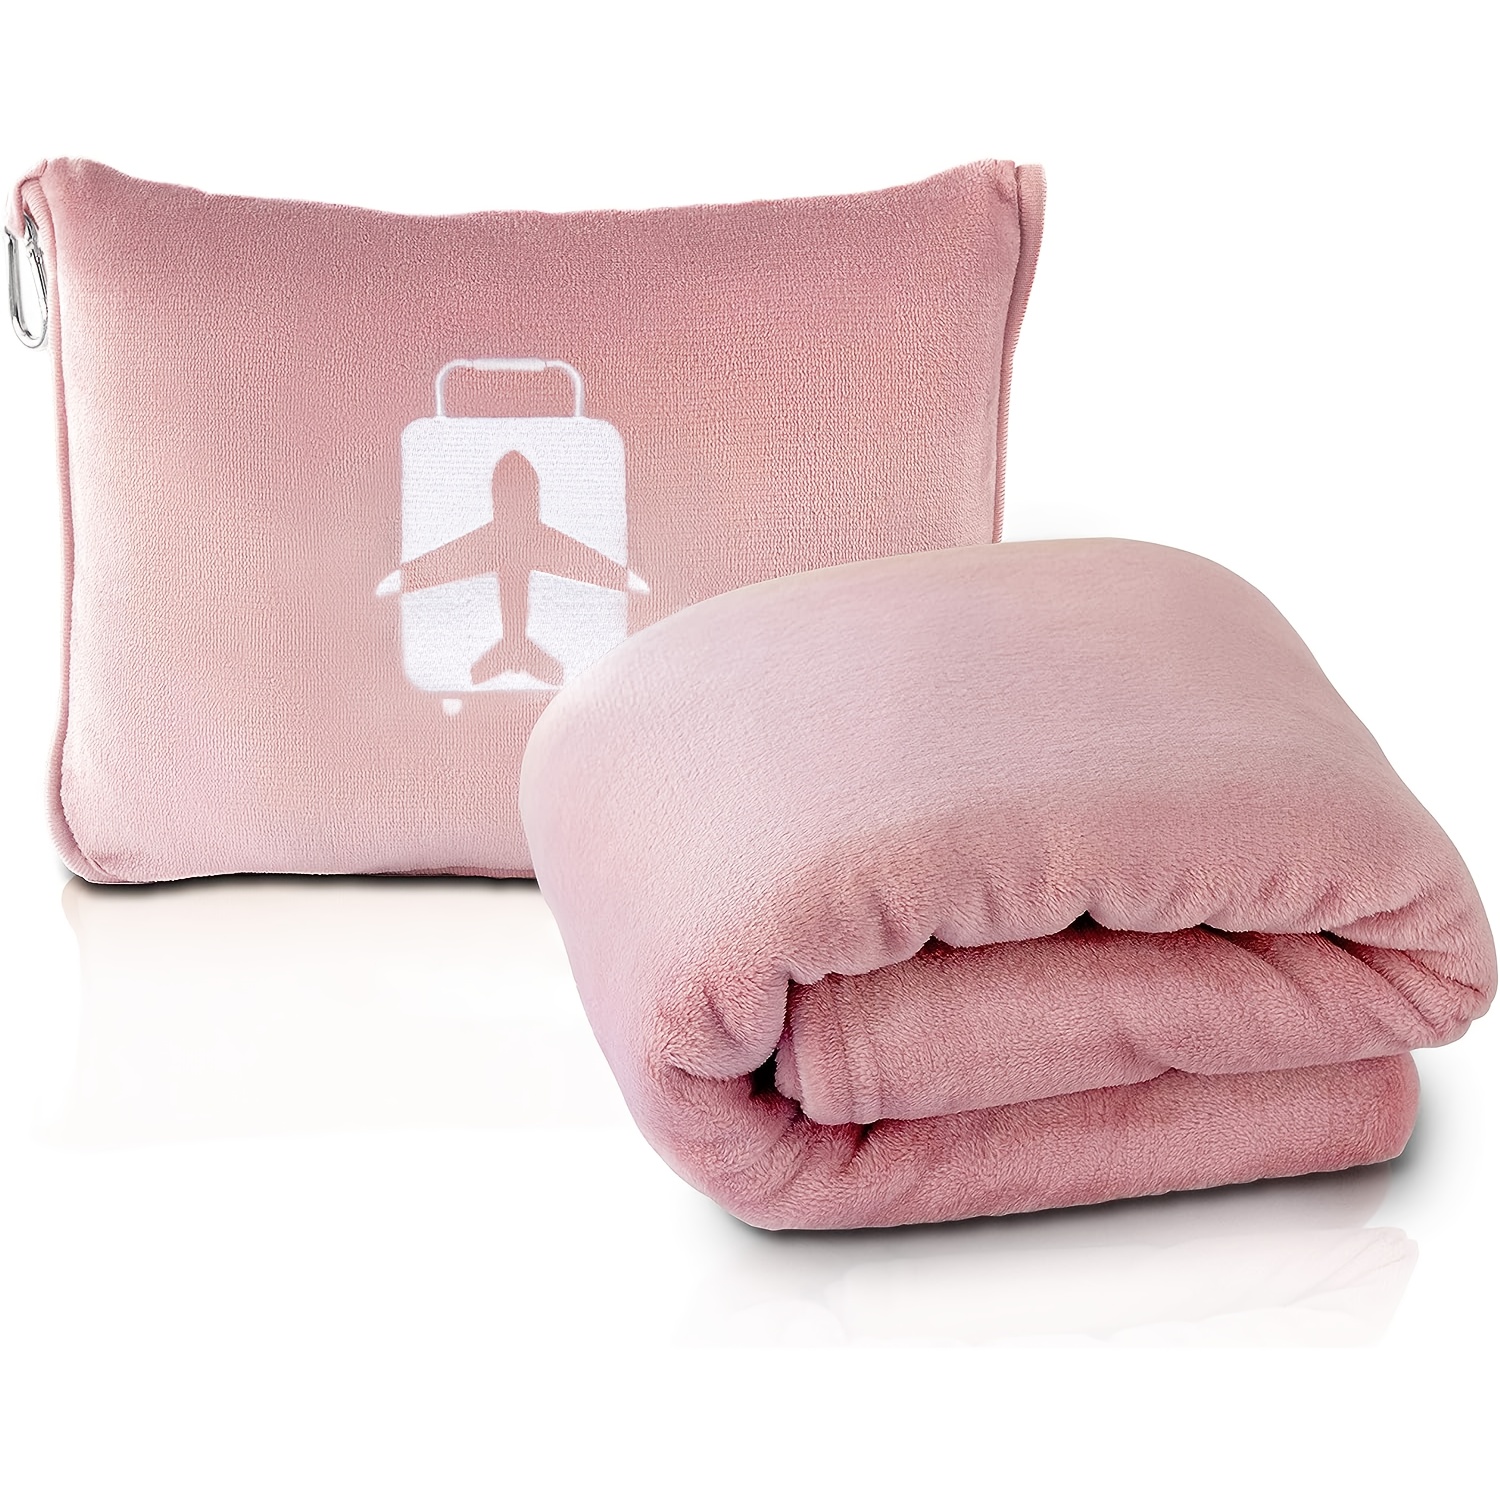 Inflatable Seats Cushion, Insulated Stadium Seat Cushion Lightweight Suede Travel  Cushion For Airplane,camping,hiking And Outdoor Activities